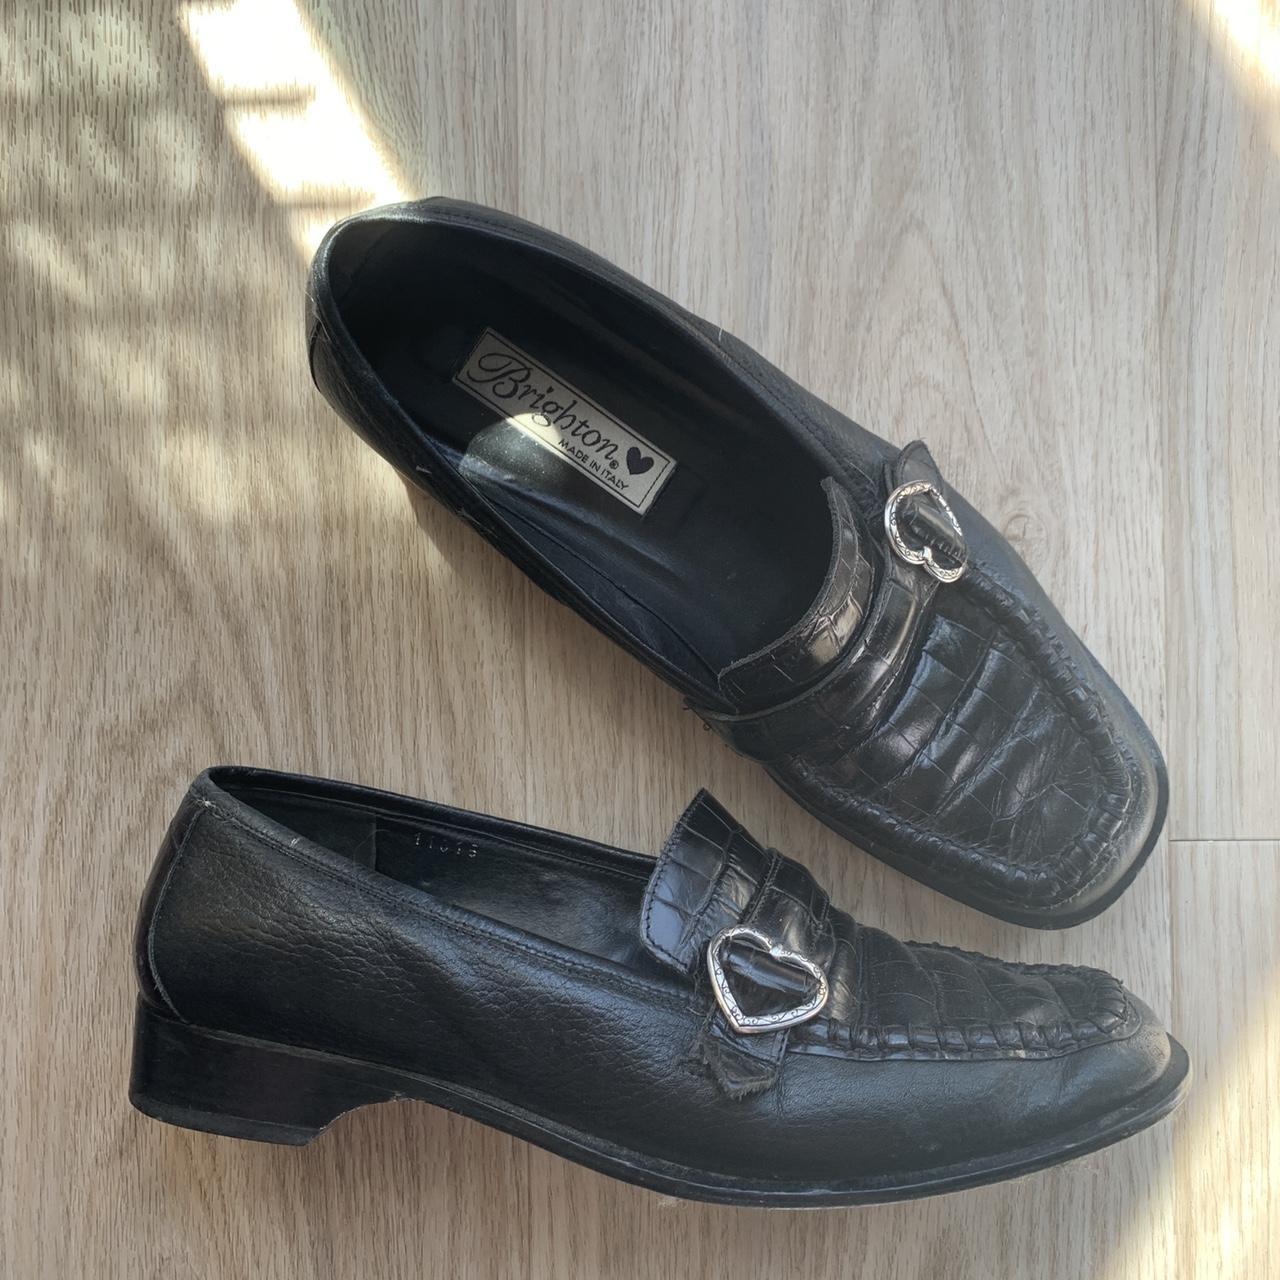 Brighton Women's Black and Silver Loafers